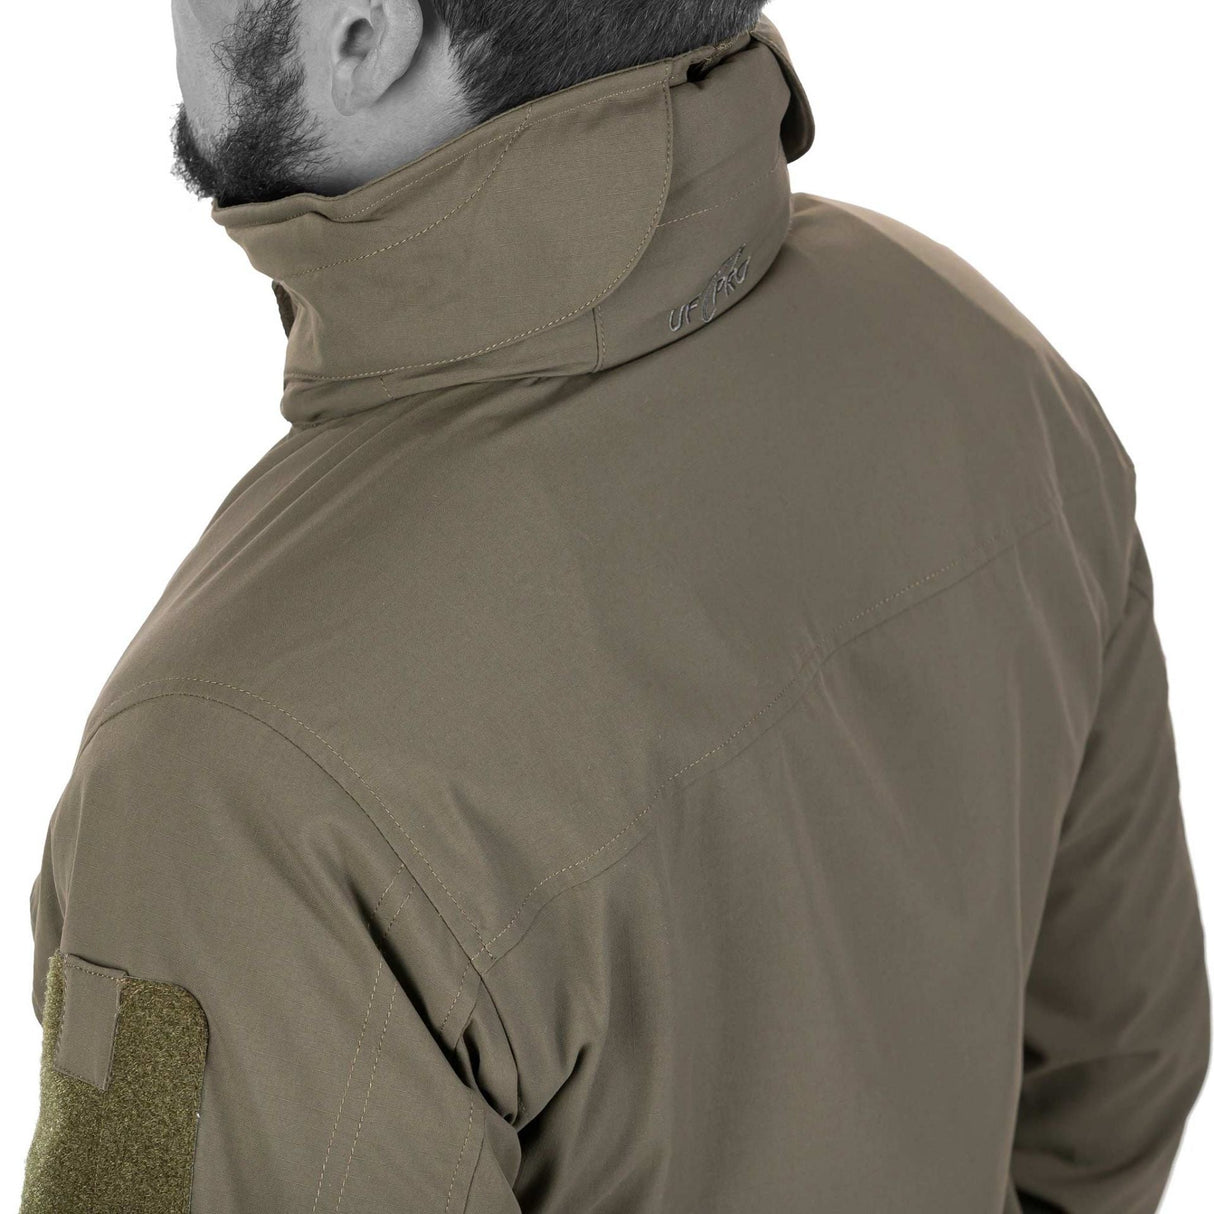 UF PRO Delta Eagle Gen.3 Tactical Softshell Jacket: Engineered for performance and durability in demanding environments.